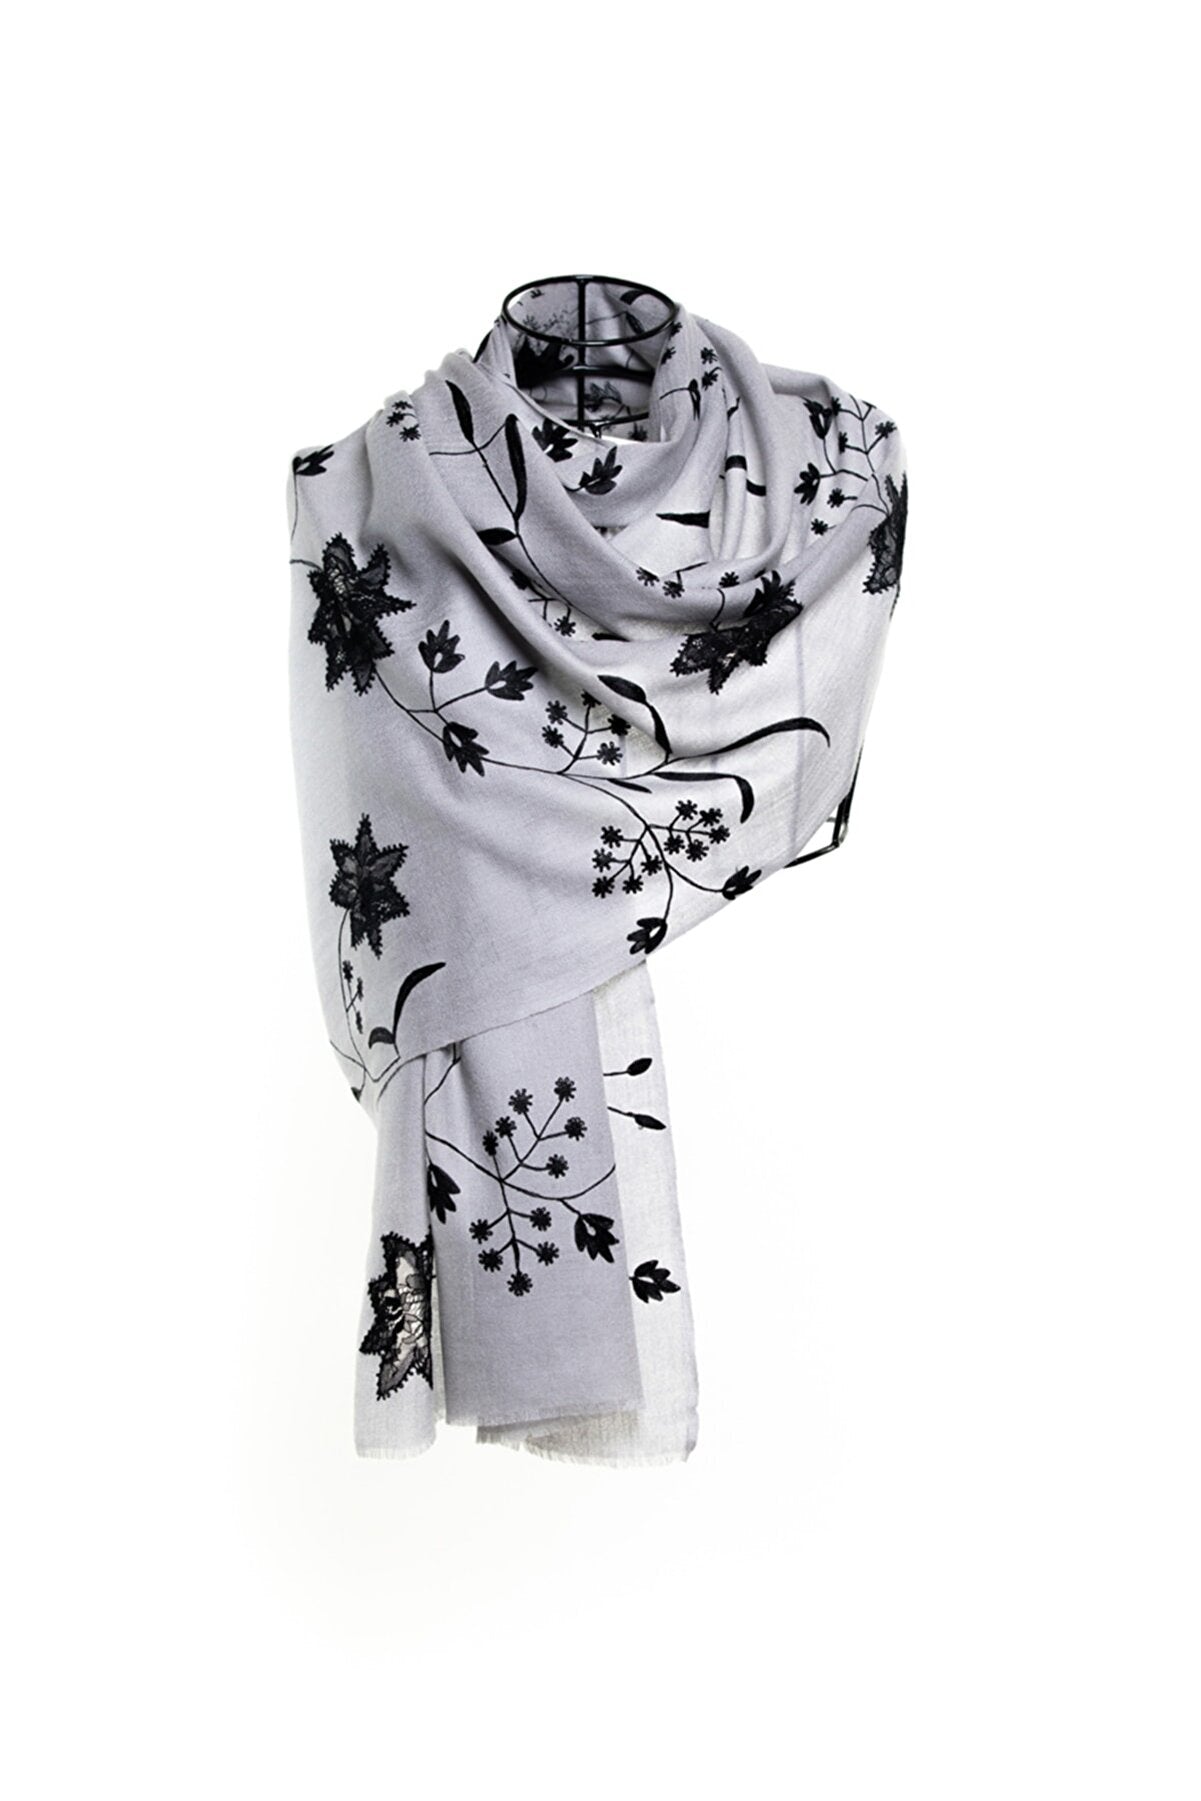 Lace & Embroidery Floral Sheer Shawl - Gray Black